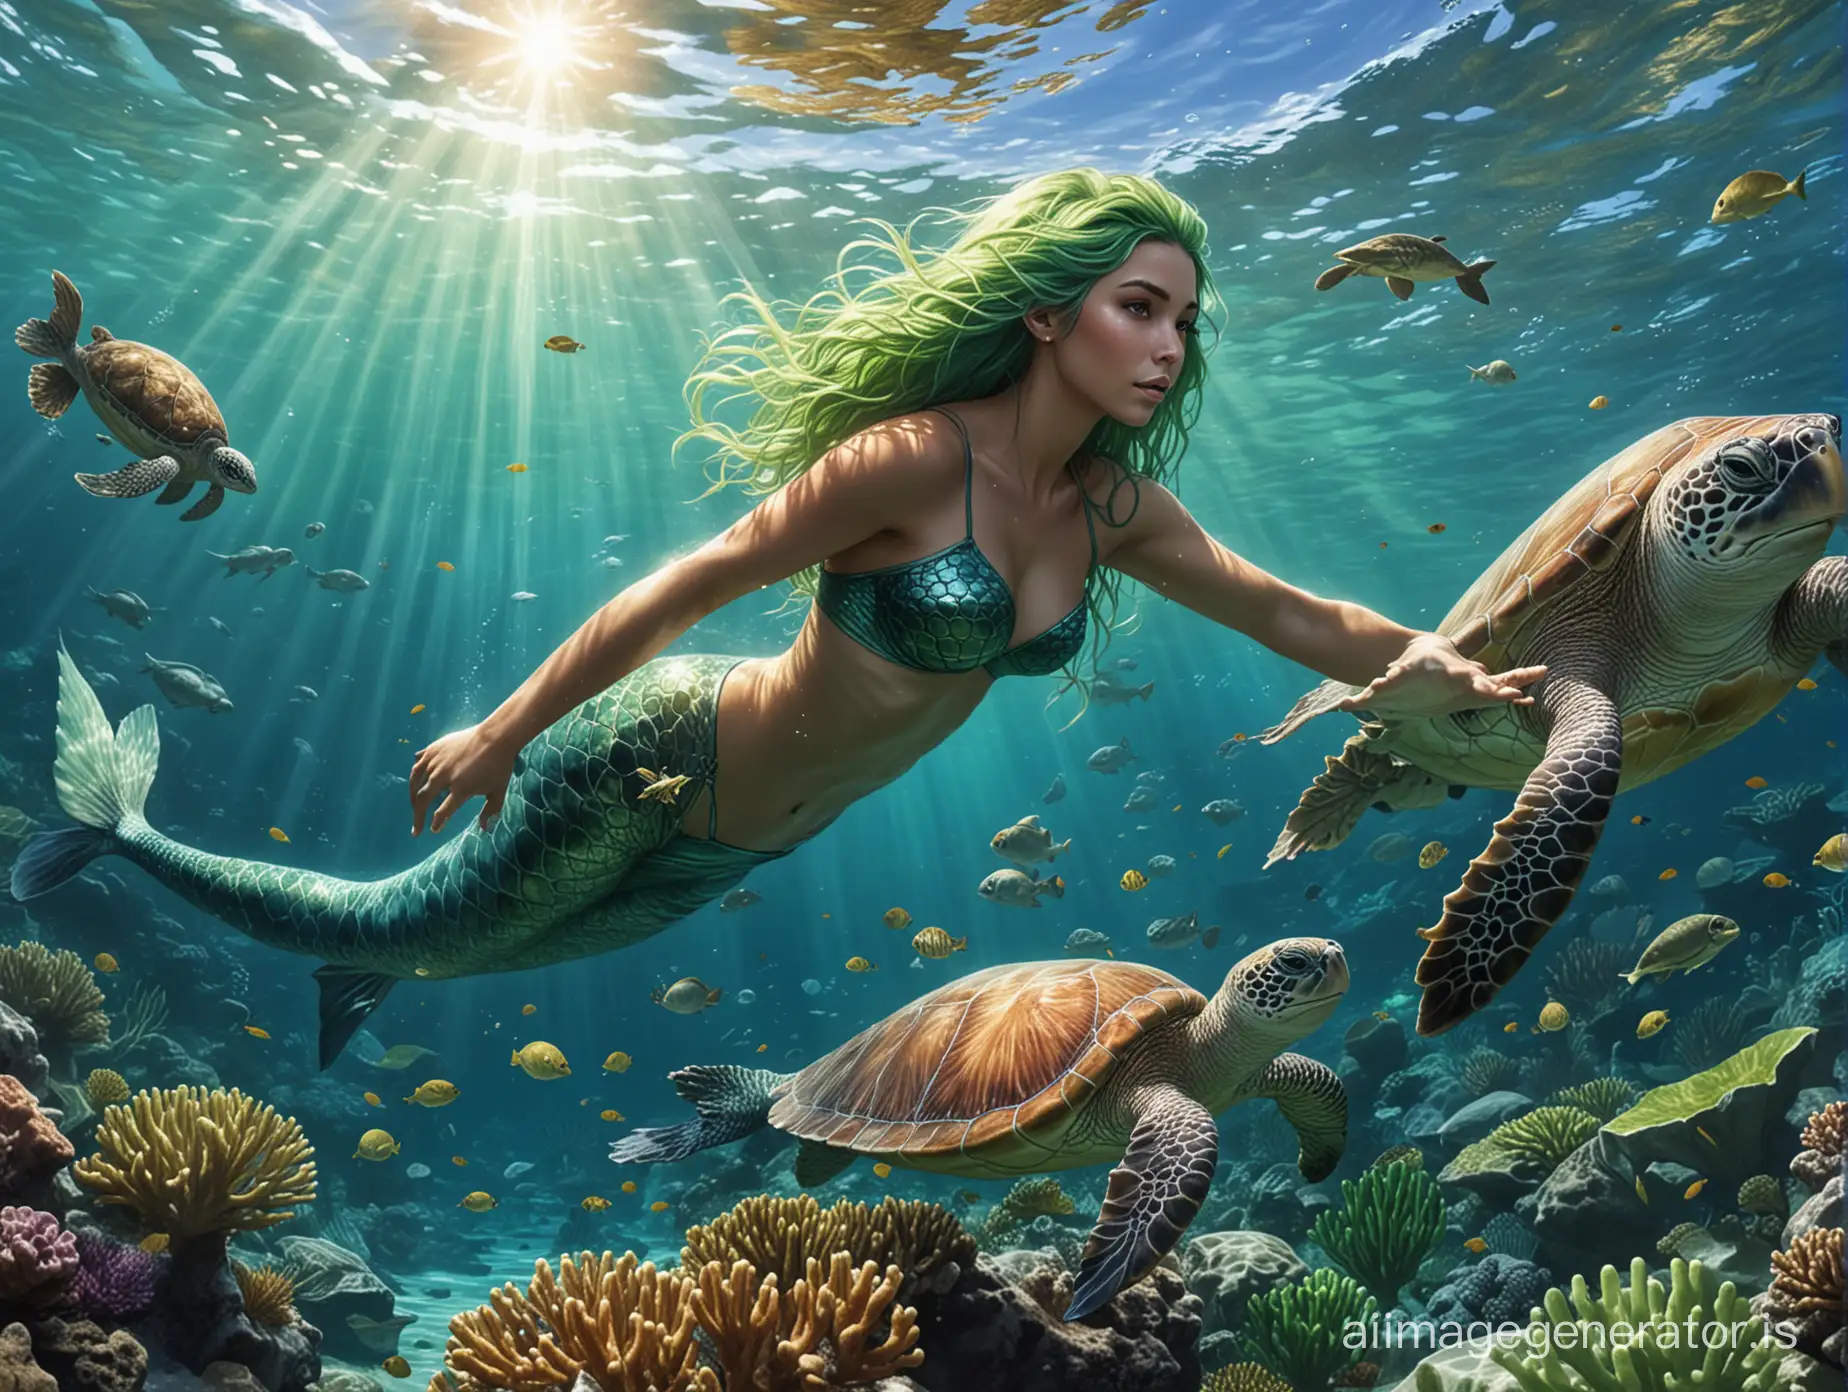 Ethereal-GreenHaired-Mermaid-Swimming-with-Giant-Turtles-and-Coral